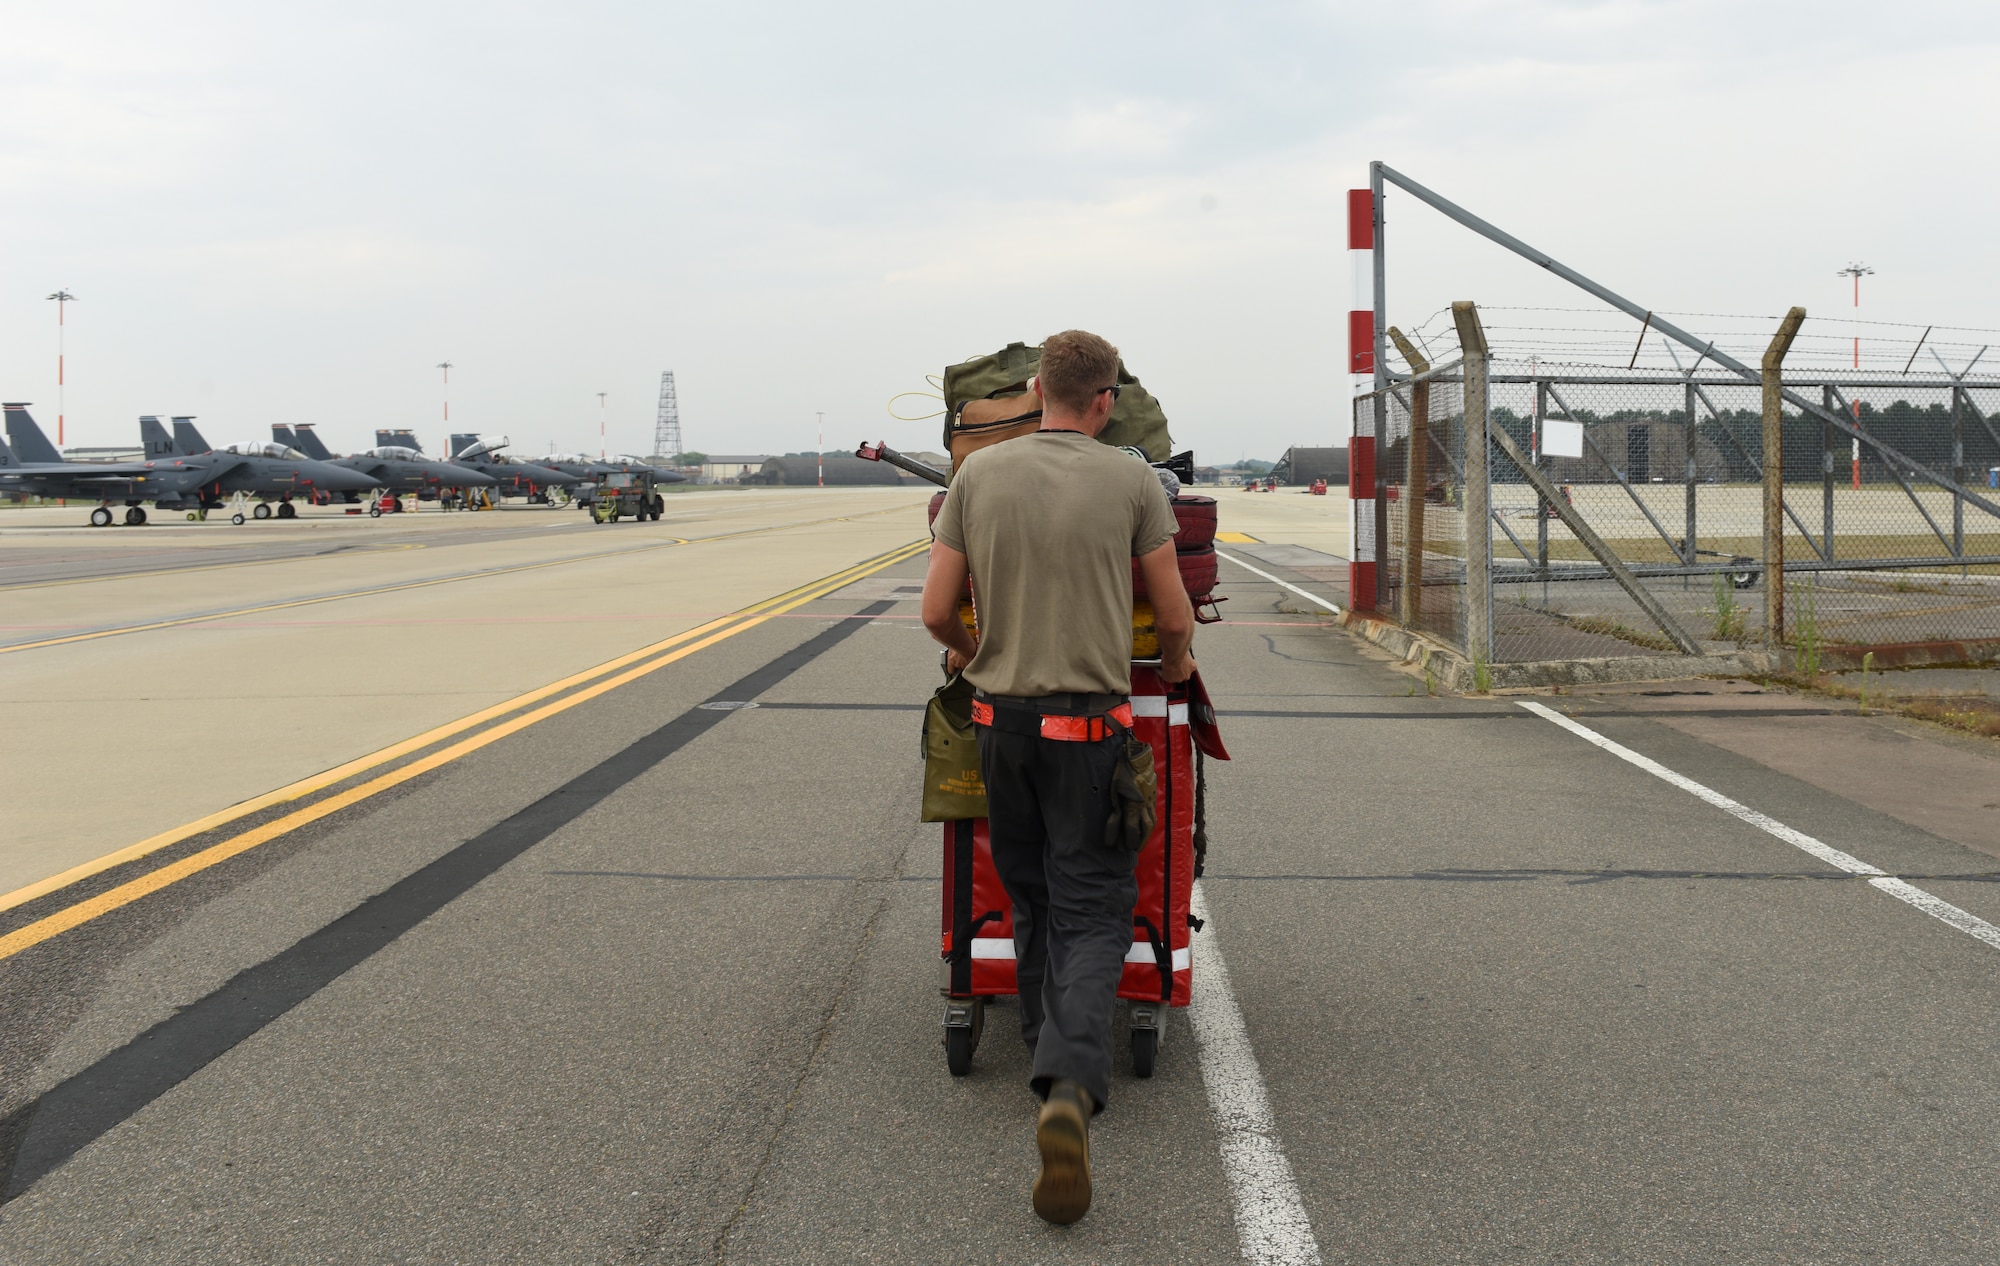 An Airman assigned to the 48th Aircraft Maintenance Squadron transports tools to the newly expanded F-15E parking ramp at Royal Air Force Lakenheath, England, Aug. 11, 2020. The ramp expansion facilitates construction of new infrastructure for the F-35A Lightning II arriving in late 2021. (U.S. Air Force photo by Airman 1st Class Rhonda Smith)